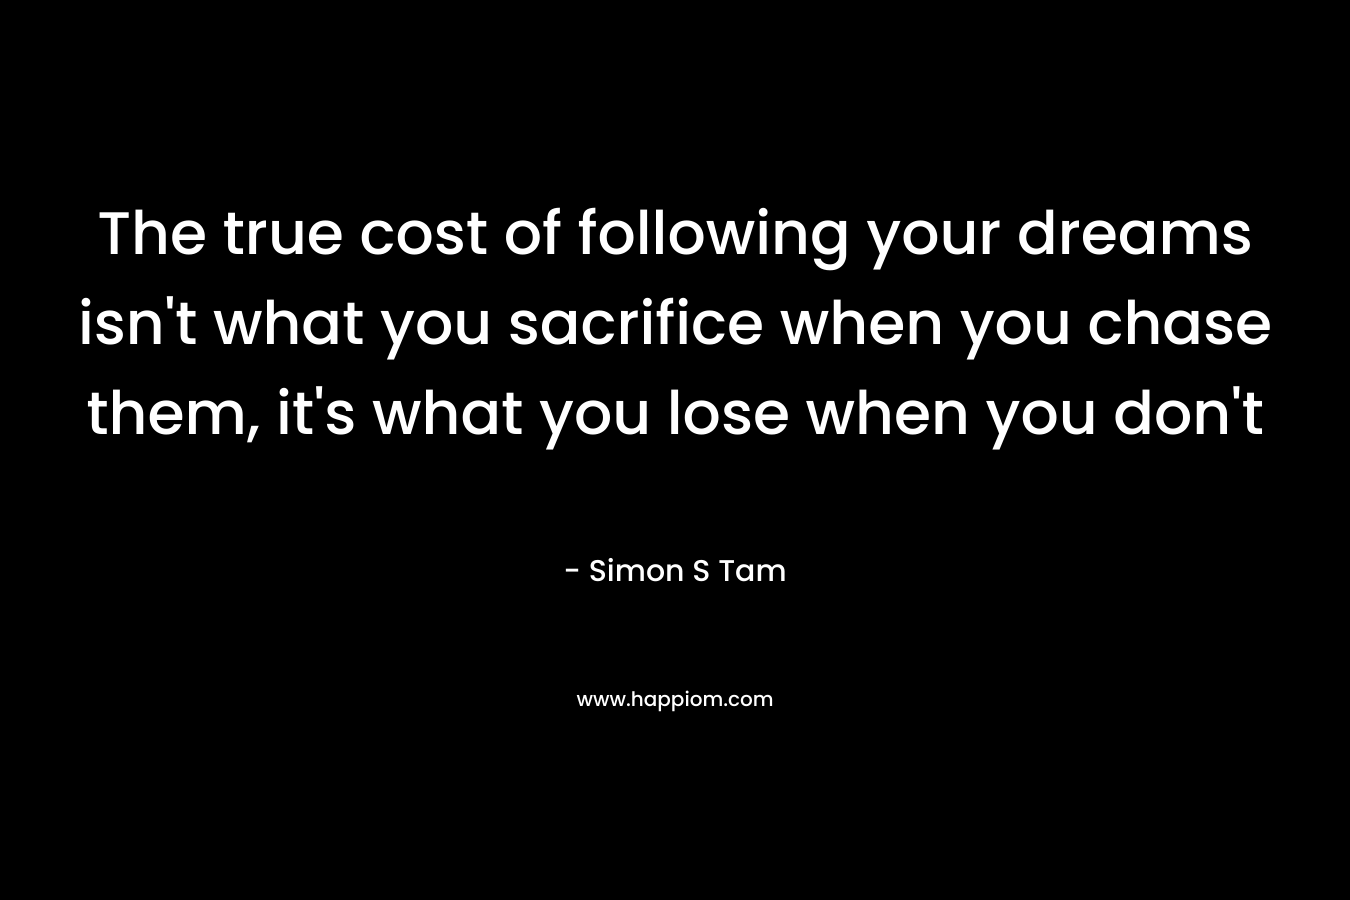 The true cost of following your dreams isn't what you sacrifice when you chase them, it's what you lose when you don't